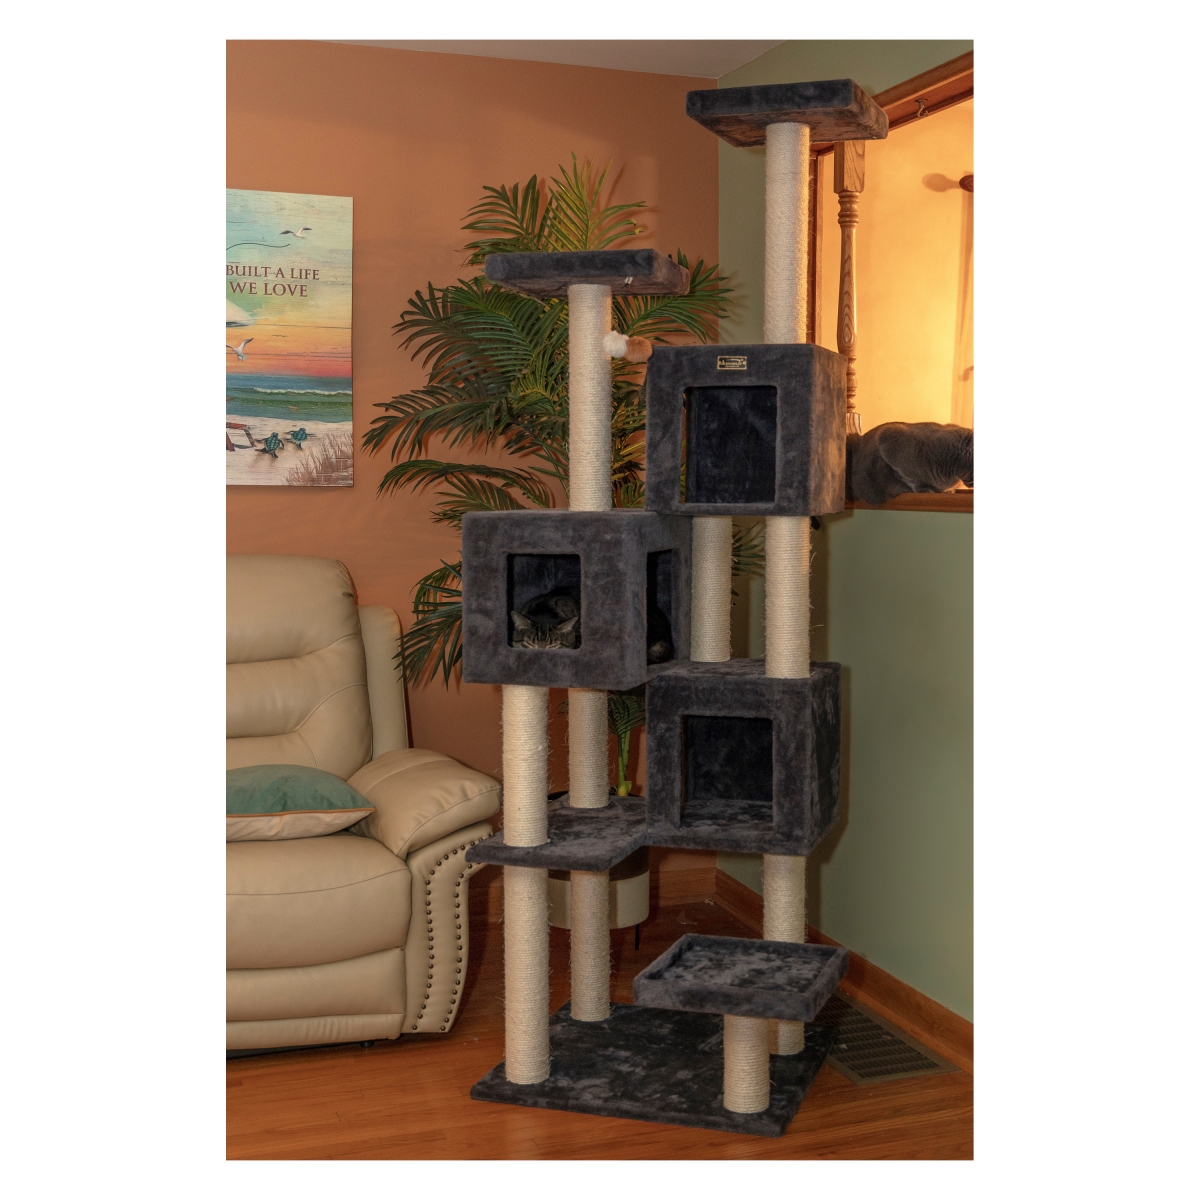 Fasten Gear Real Wood Griant Cat Tower with Condos for Multiple Cats